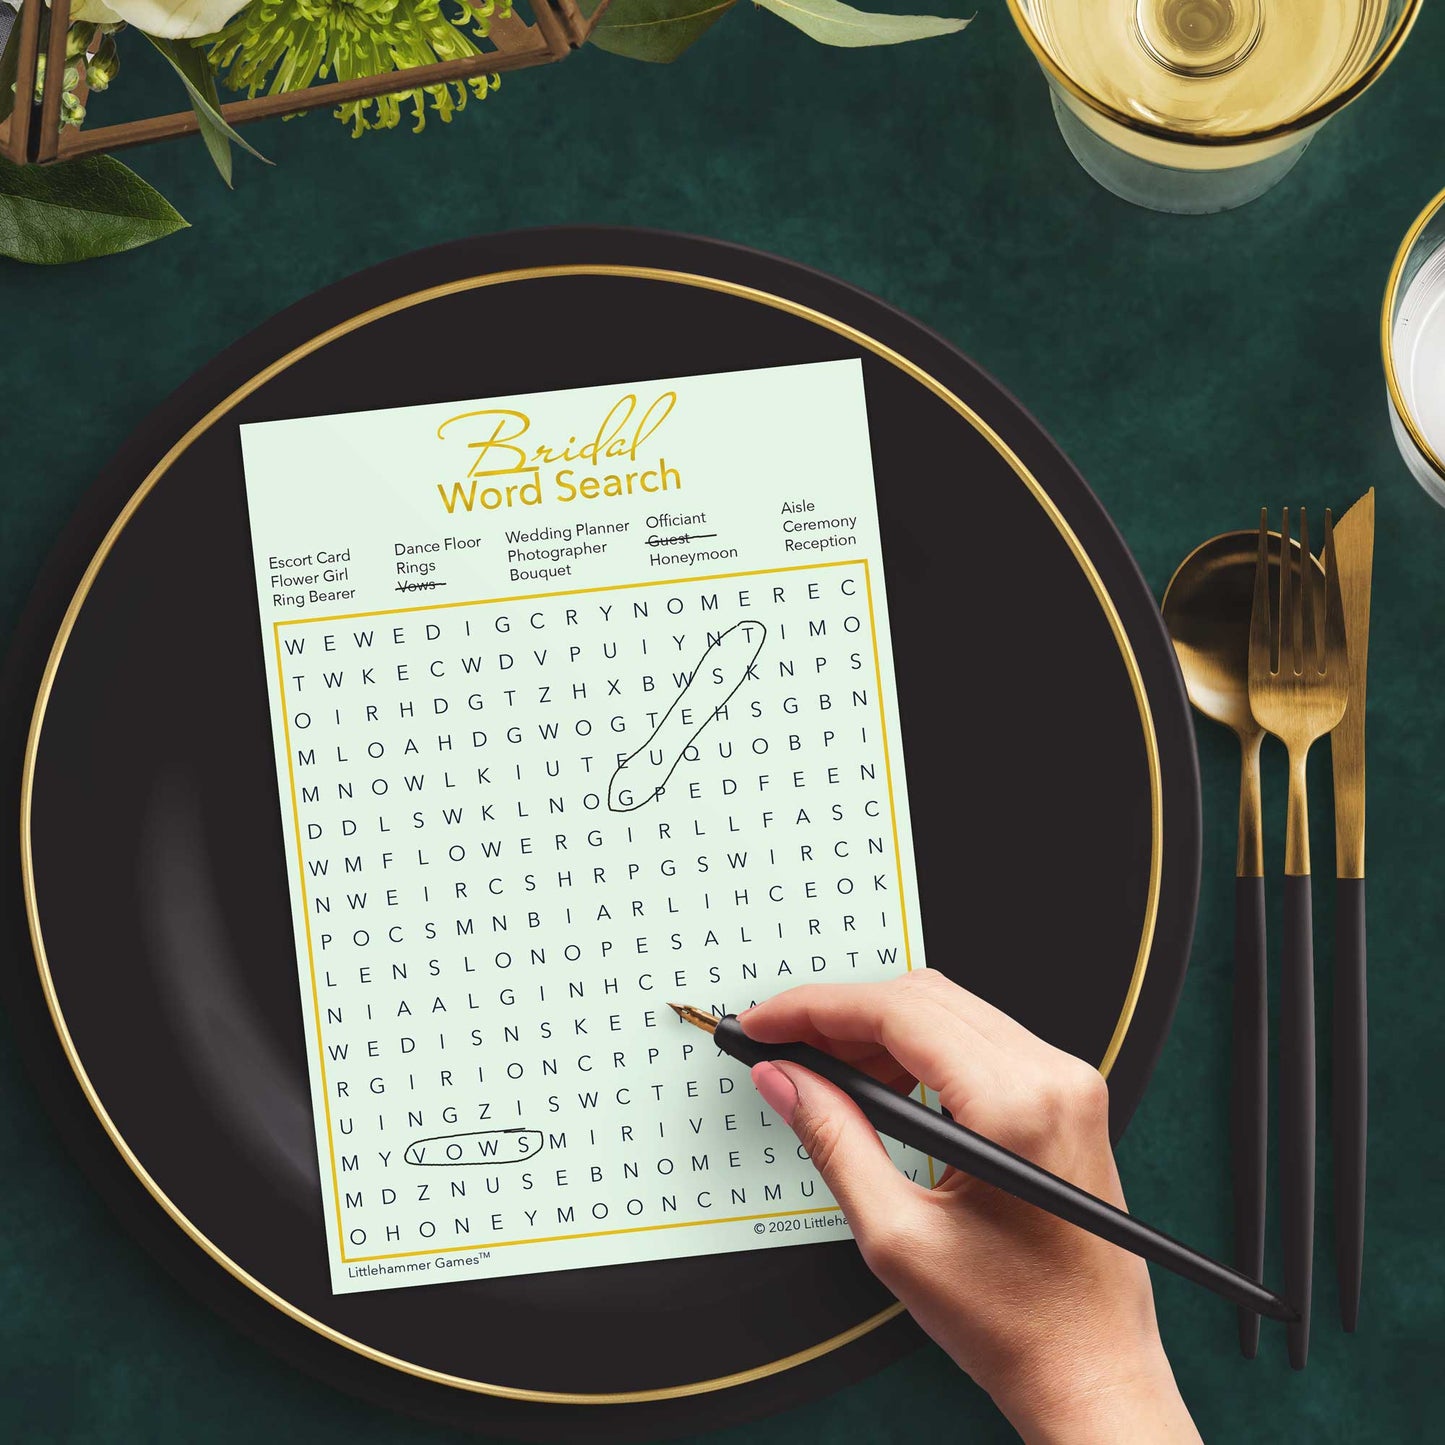 Woman with a pen playing a mint and gold Bridal Word Search game card at a dark place setting